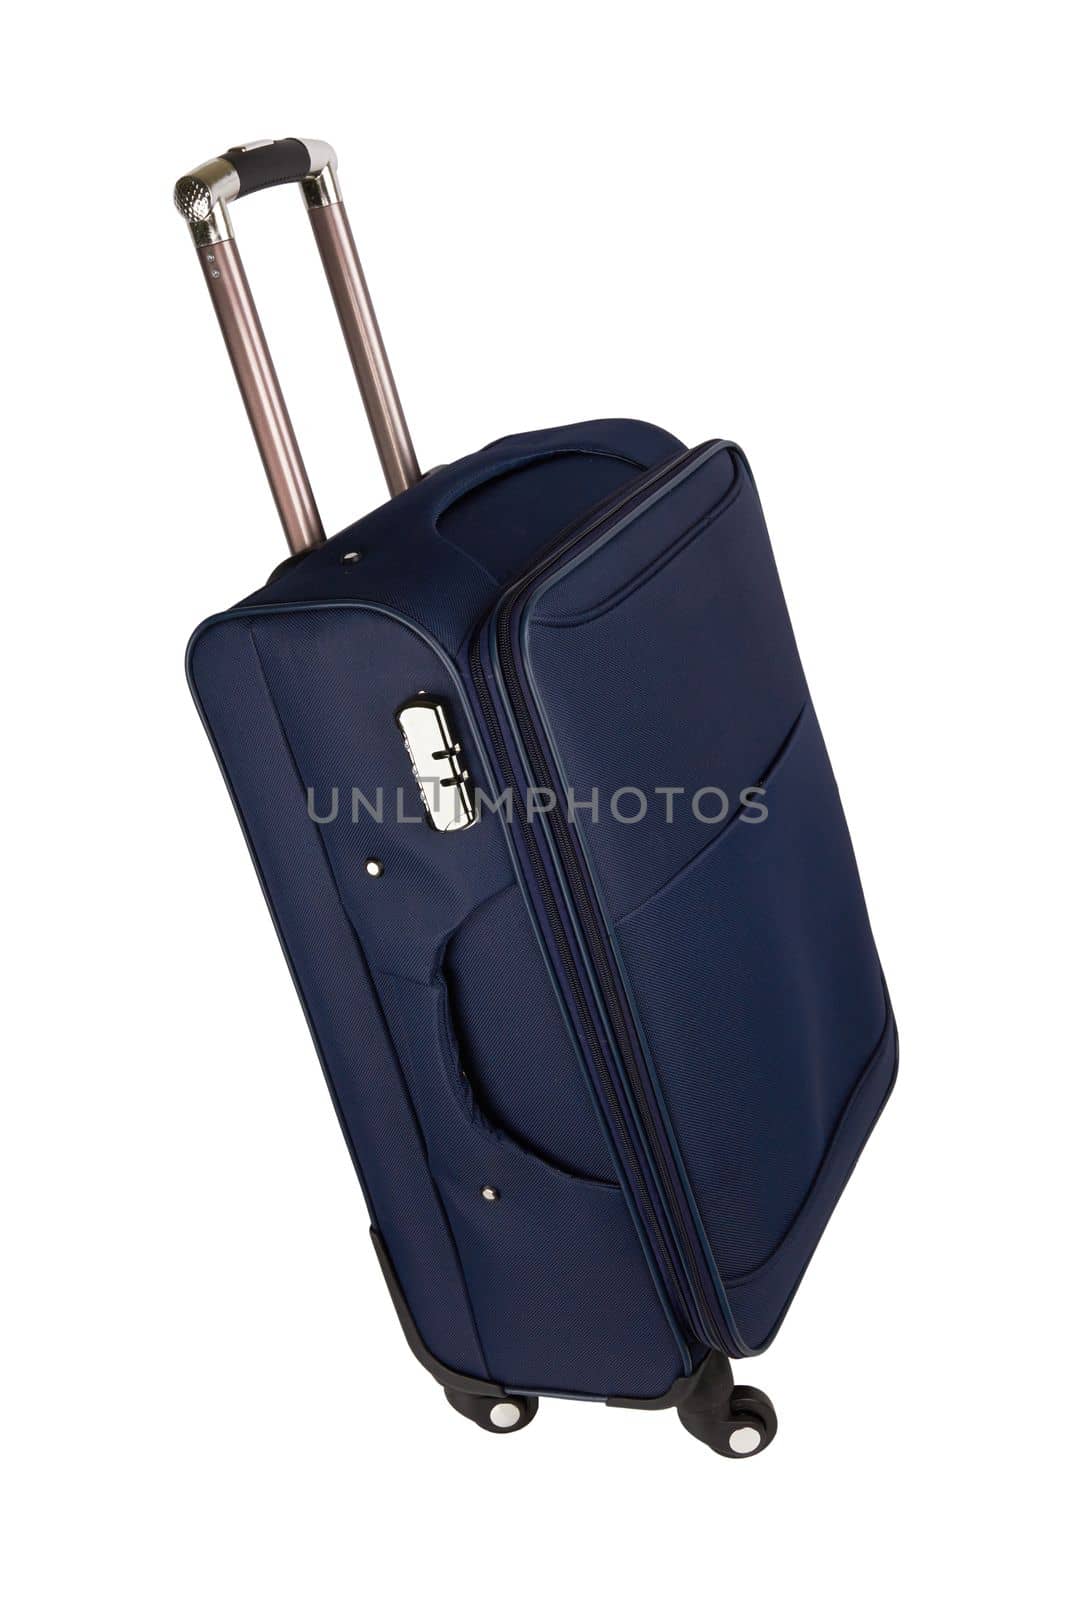 Blue suitcase isolated on a white background